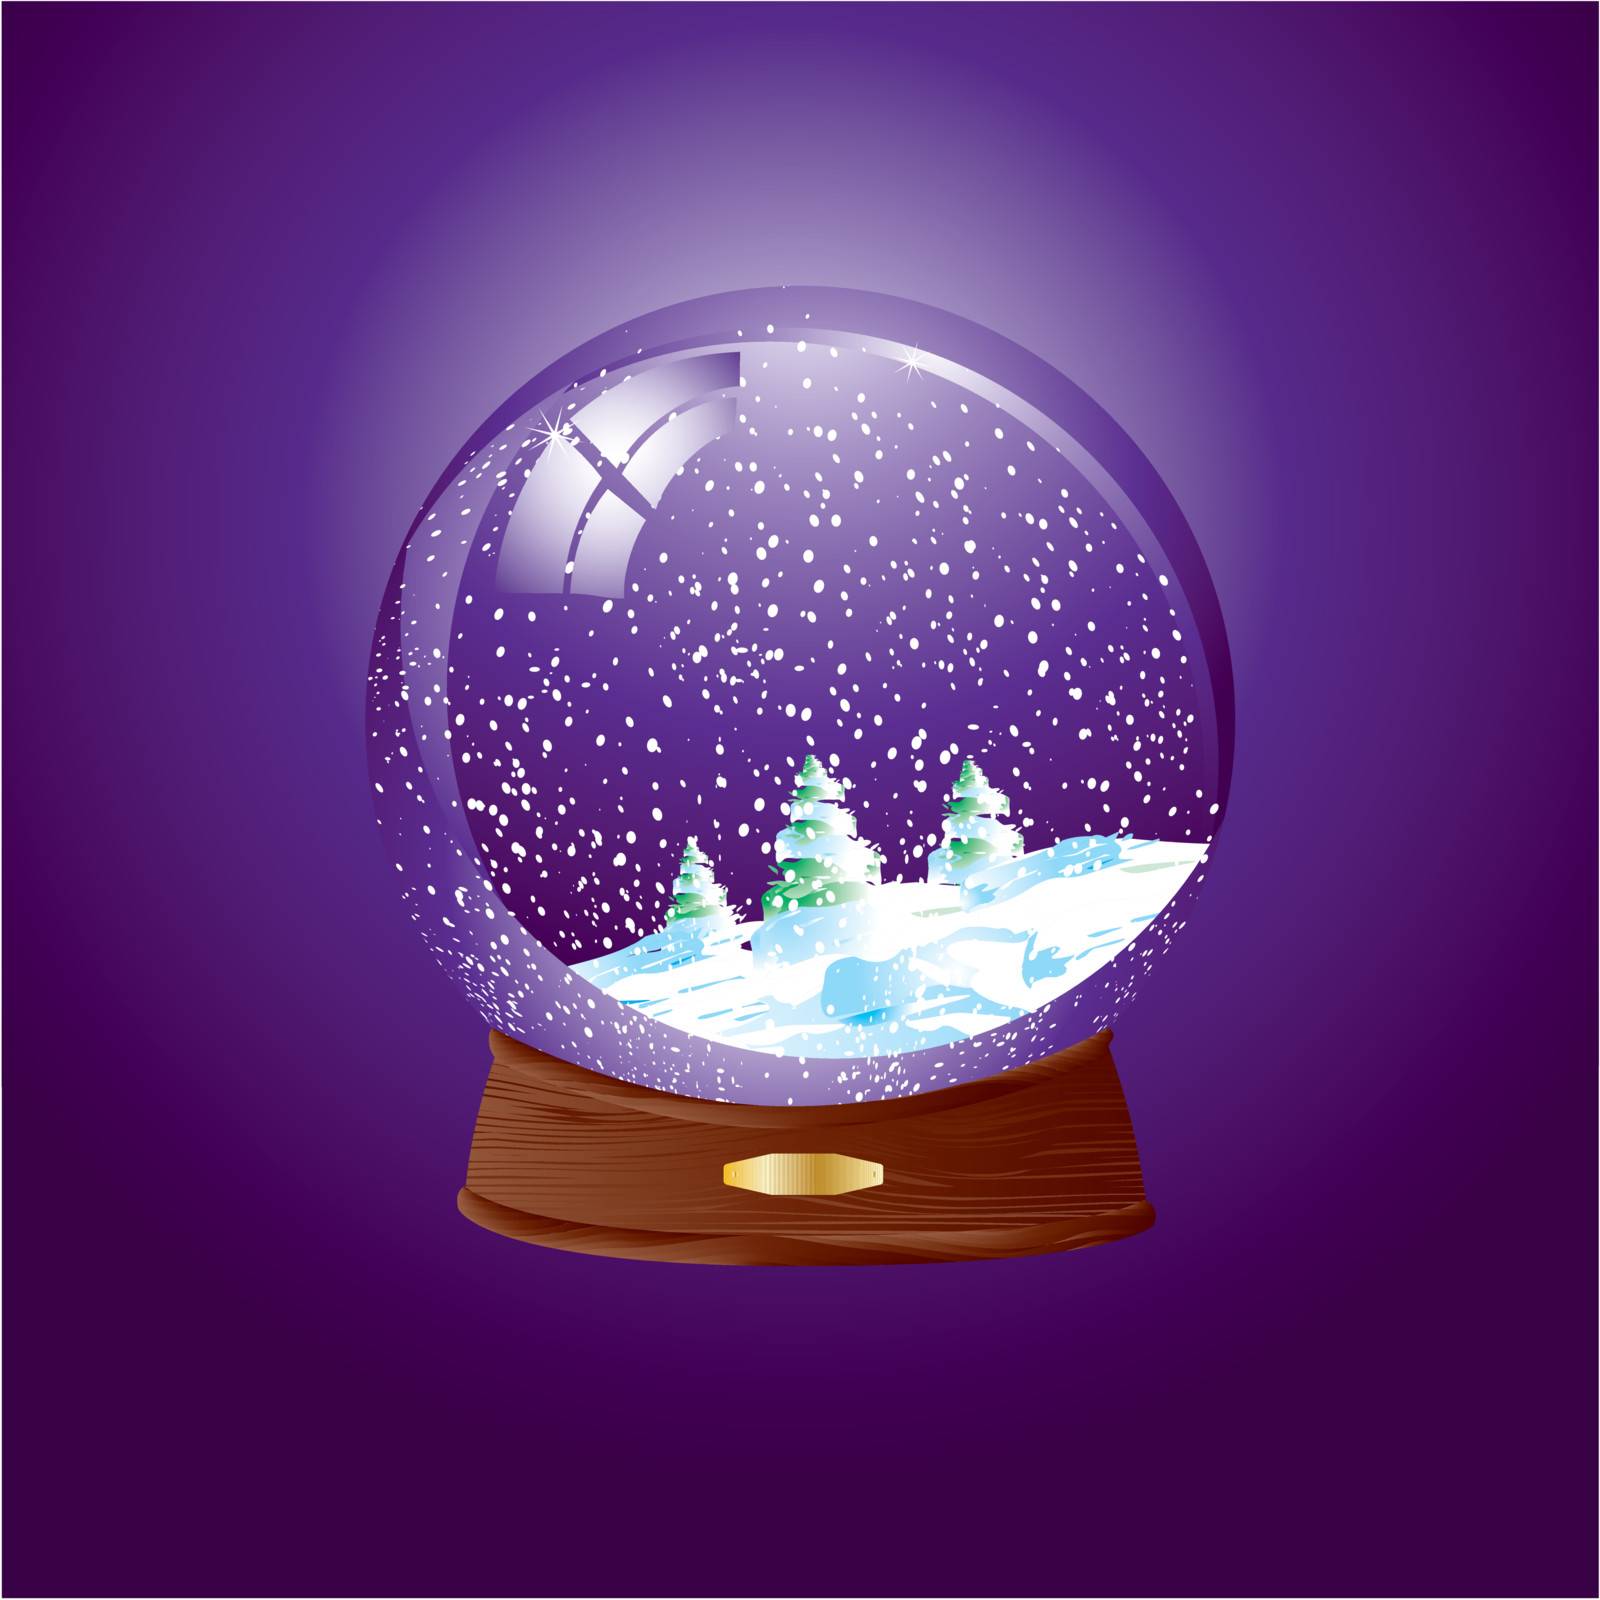 Realistic vector illustration of an snow dome against a purple background with winter landscape - Easy to insert your own object